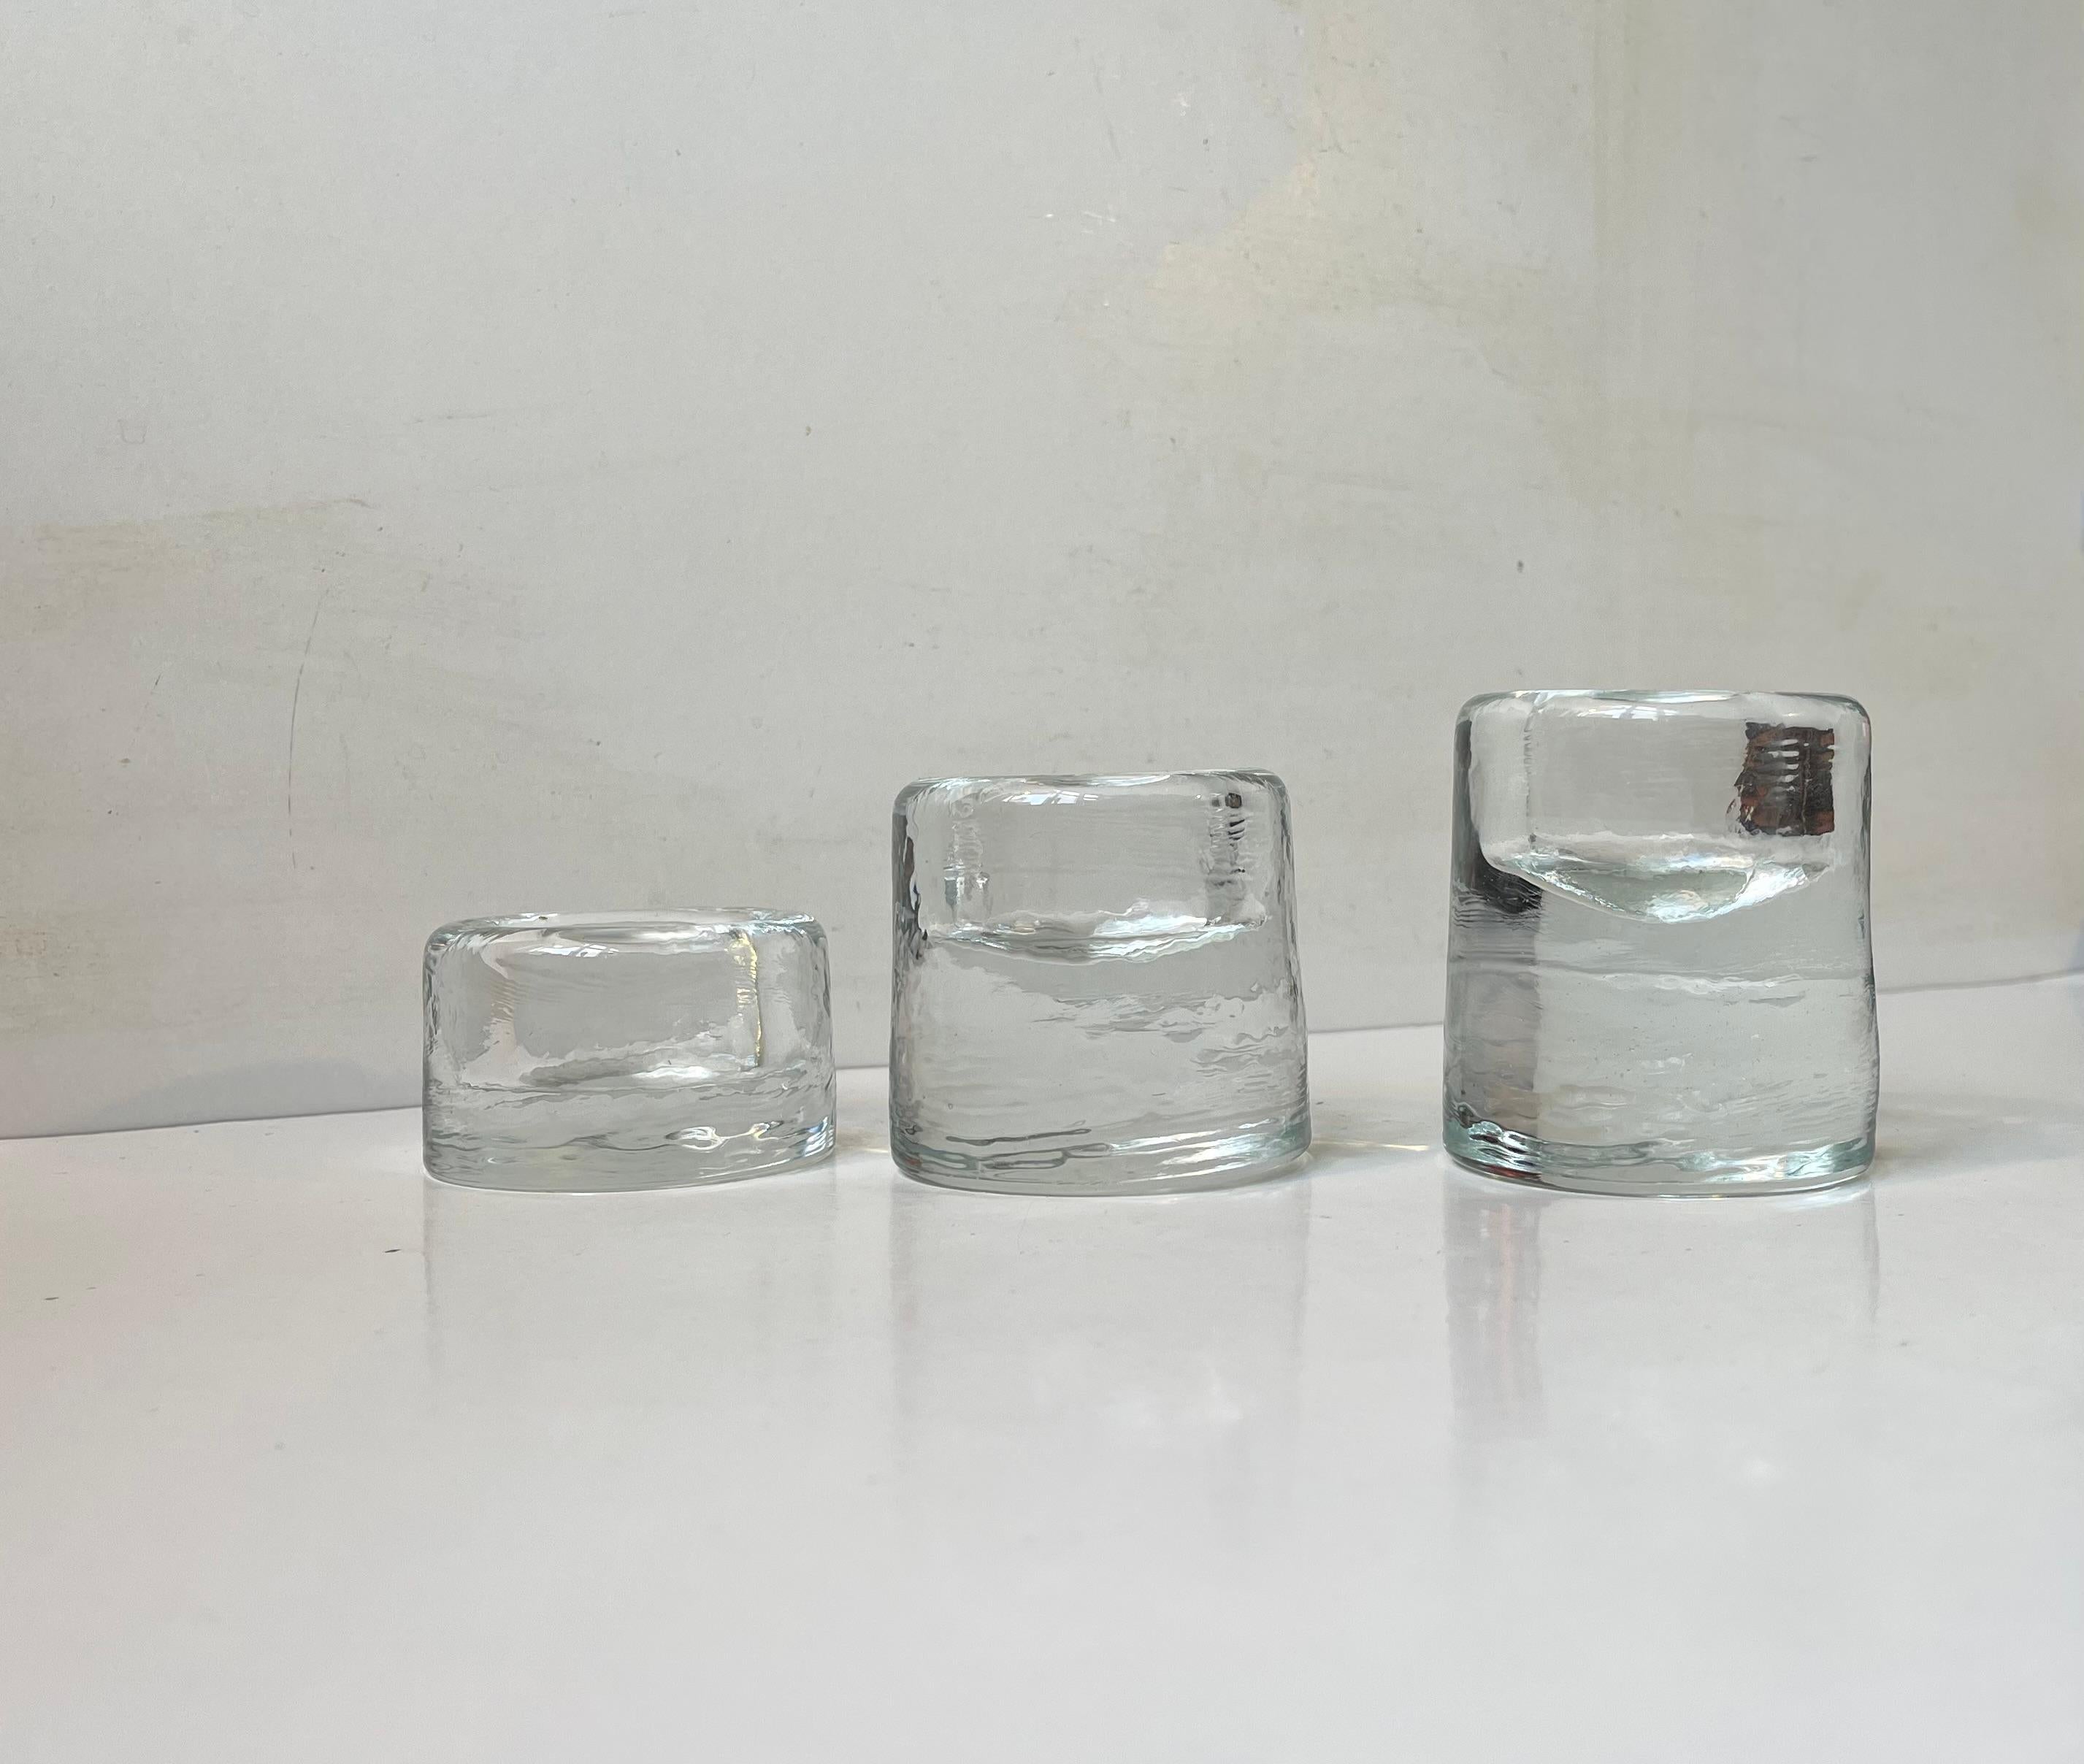 A set of 3 ice-glass chimney/cylindrical candleholder for bock, tea lights and ball lights. Unknown Scandinavian maker/designer circa 1980 in the style of Littala Finland. Wellkepot and clean. Measurements: H: 4.5/6.5/8 cm. Diameter: 7/4.5 cm